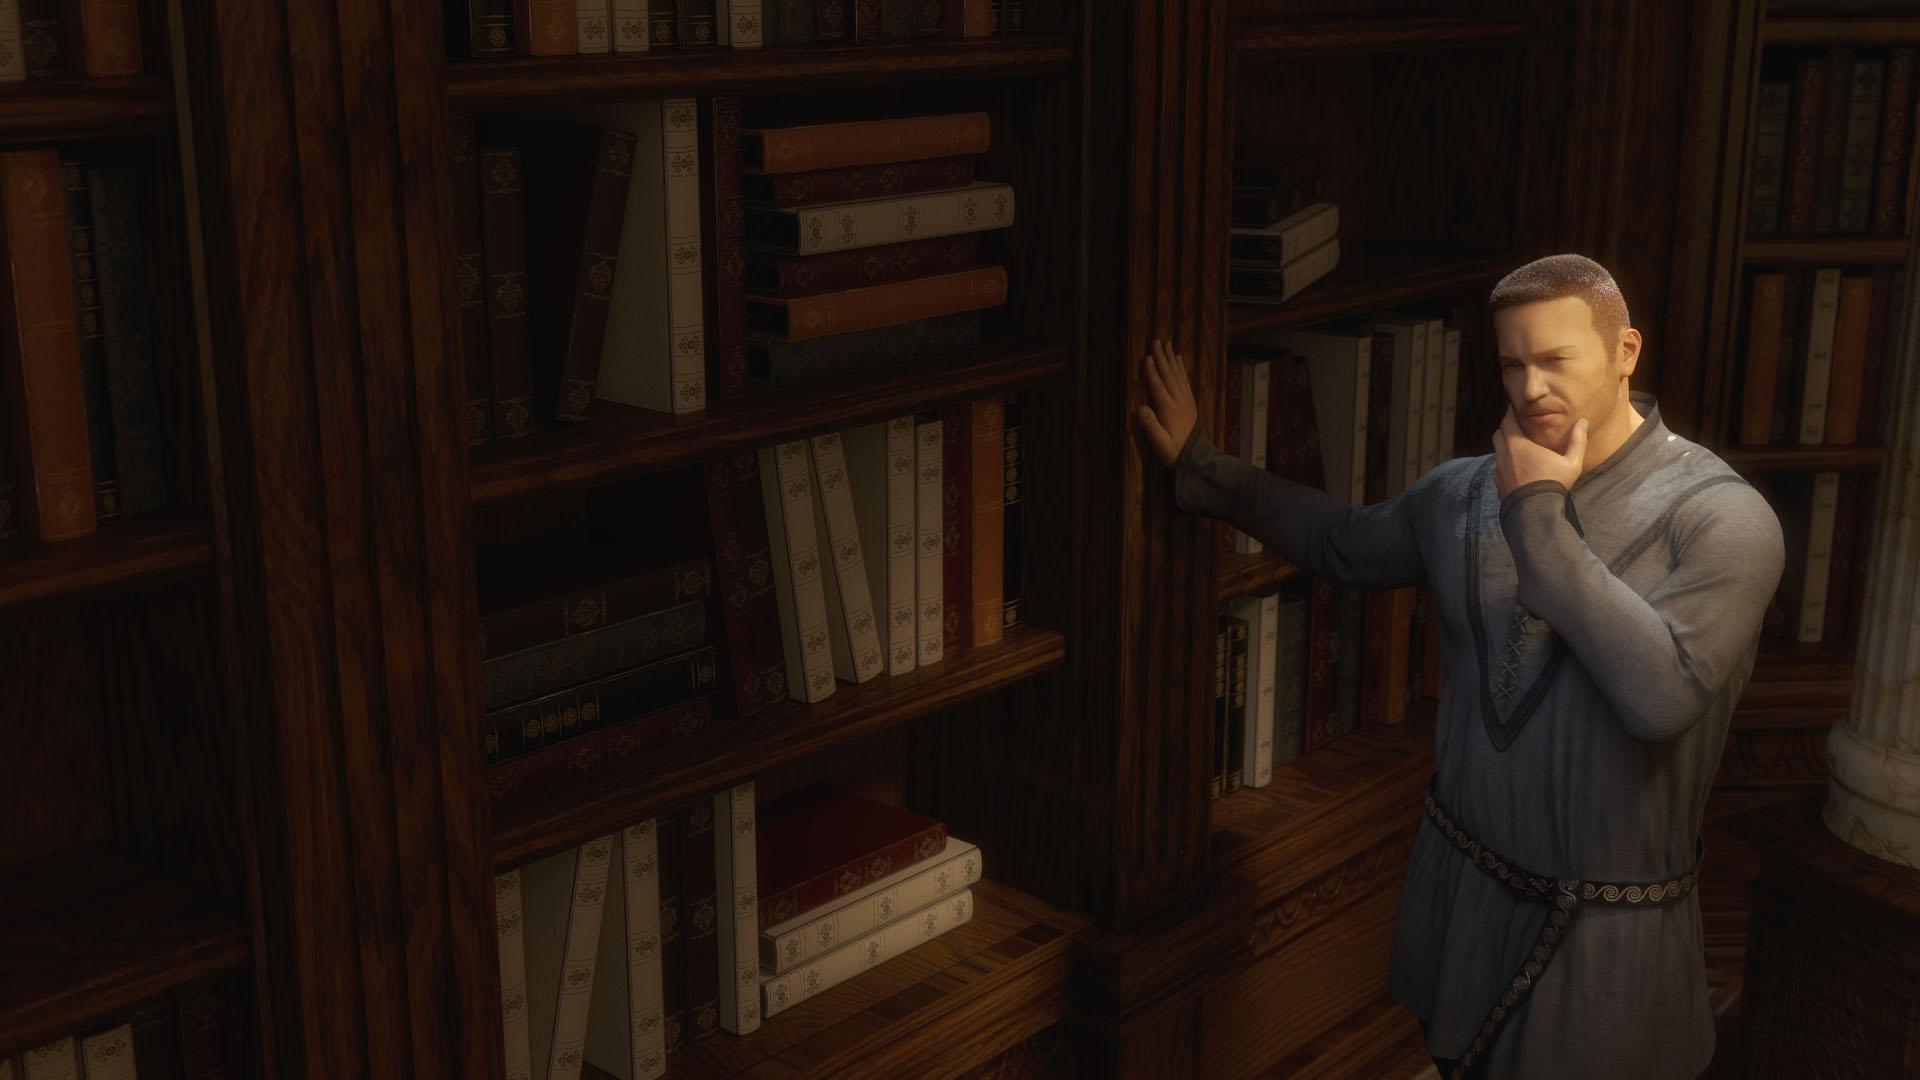 A wizard in his library, contemplating